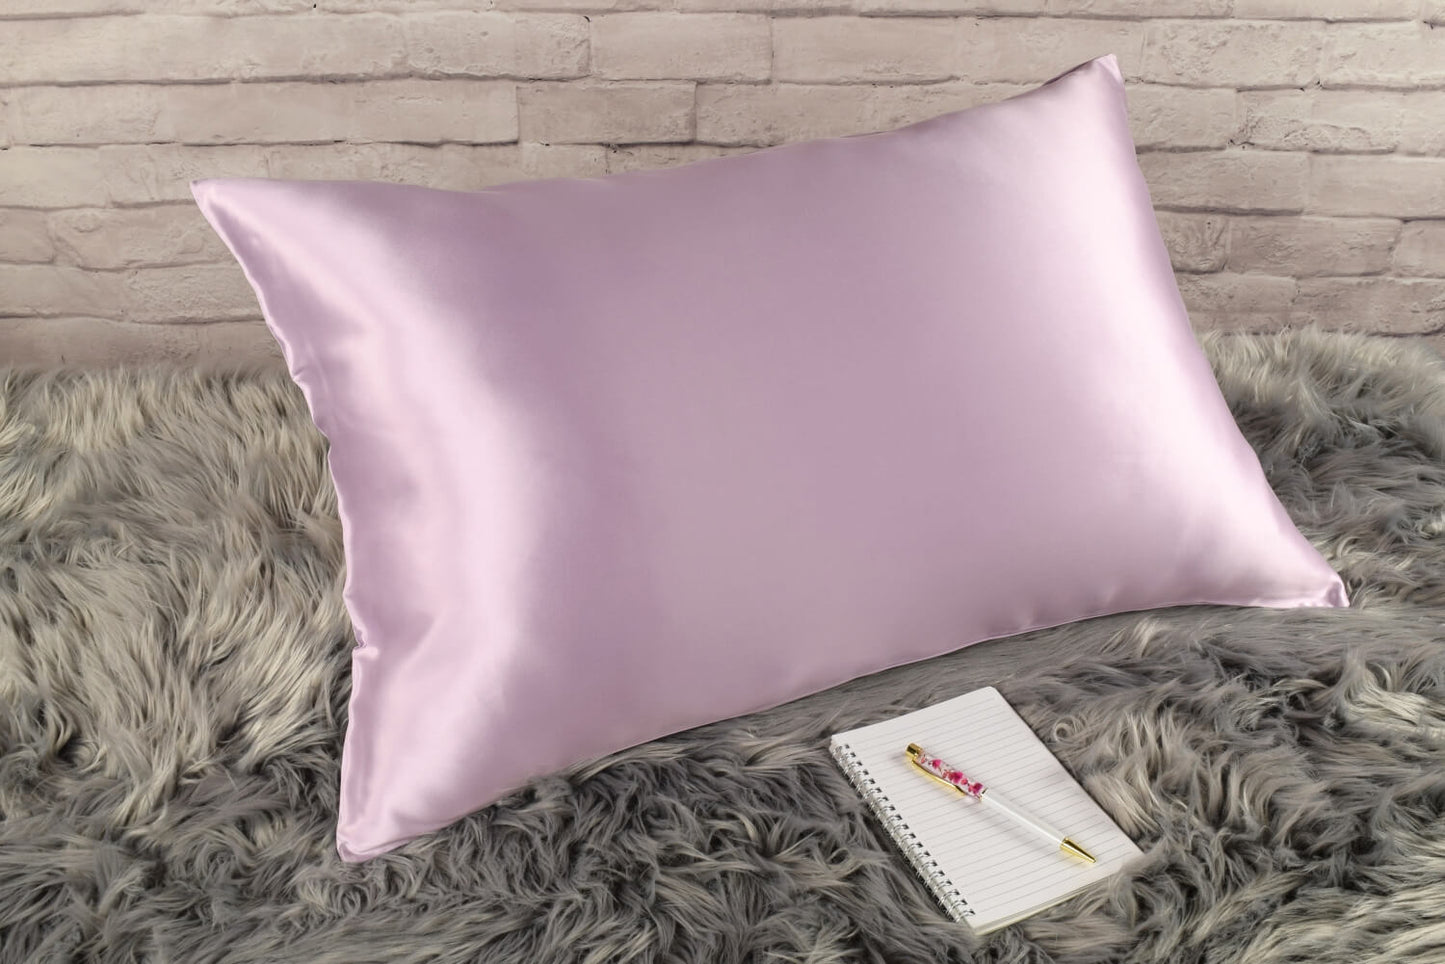 Celestial Silk 25 momme lavender silk pillowcase on faux fur rug with notebook and pretty pen